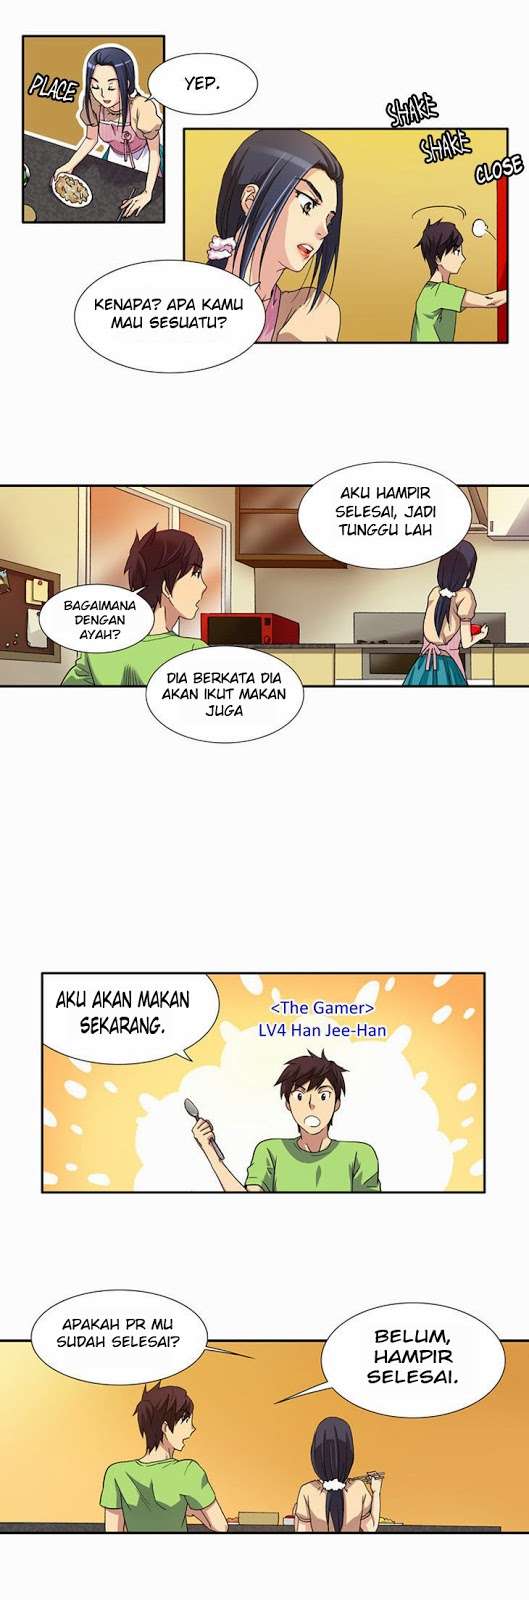 The Gamer Chapter 1 19